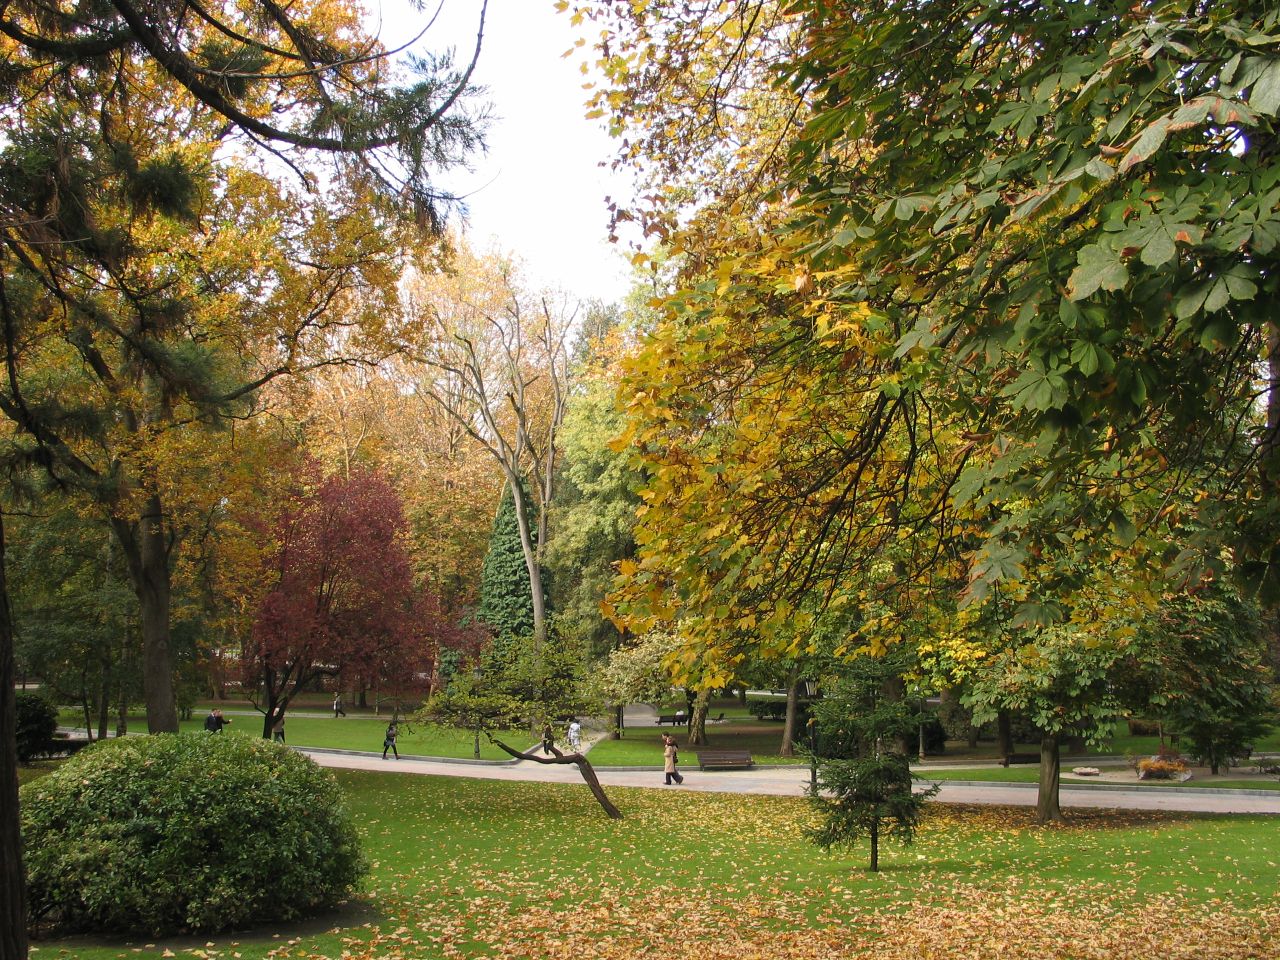 park with benches and trees in autumn colors